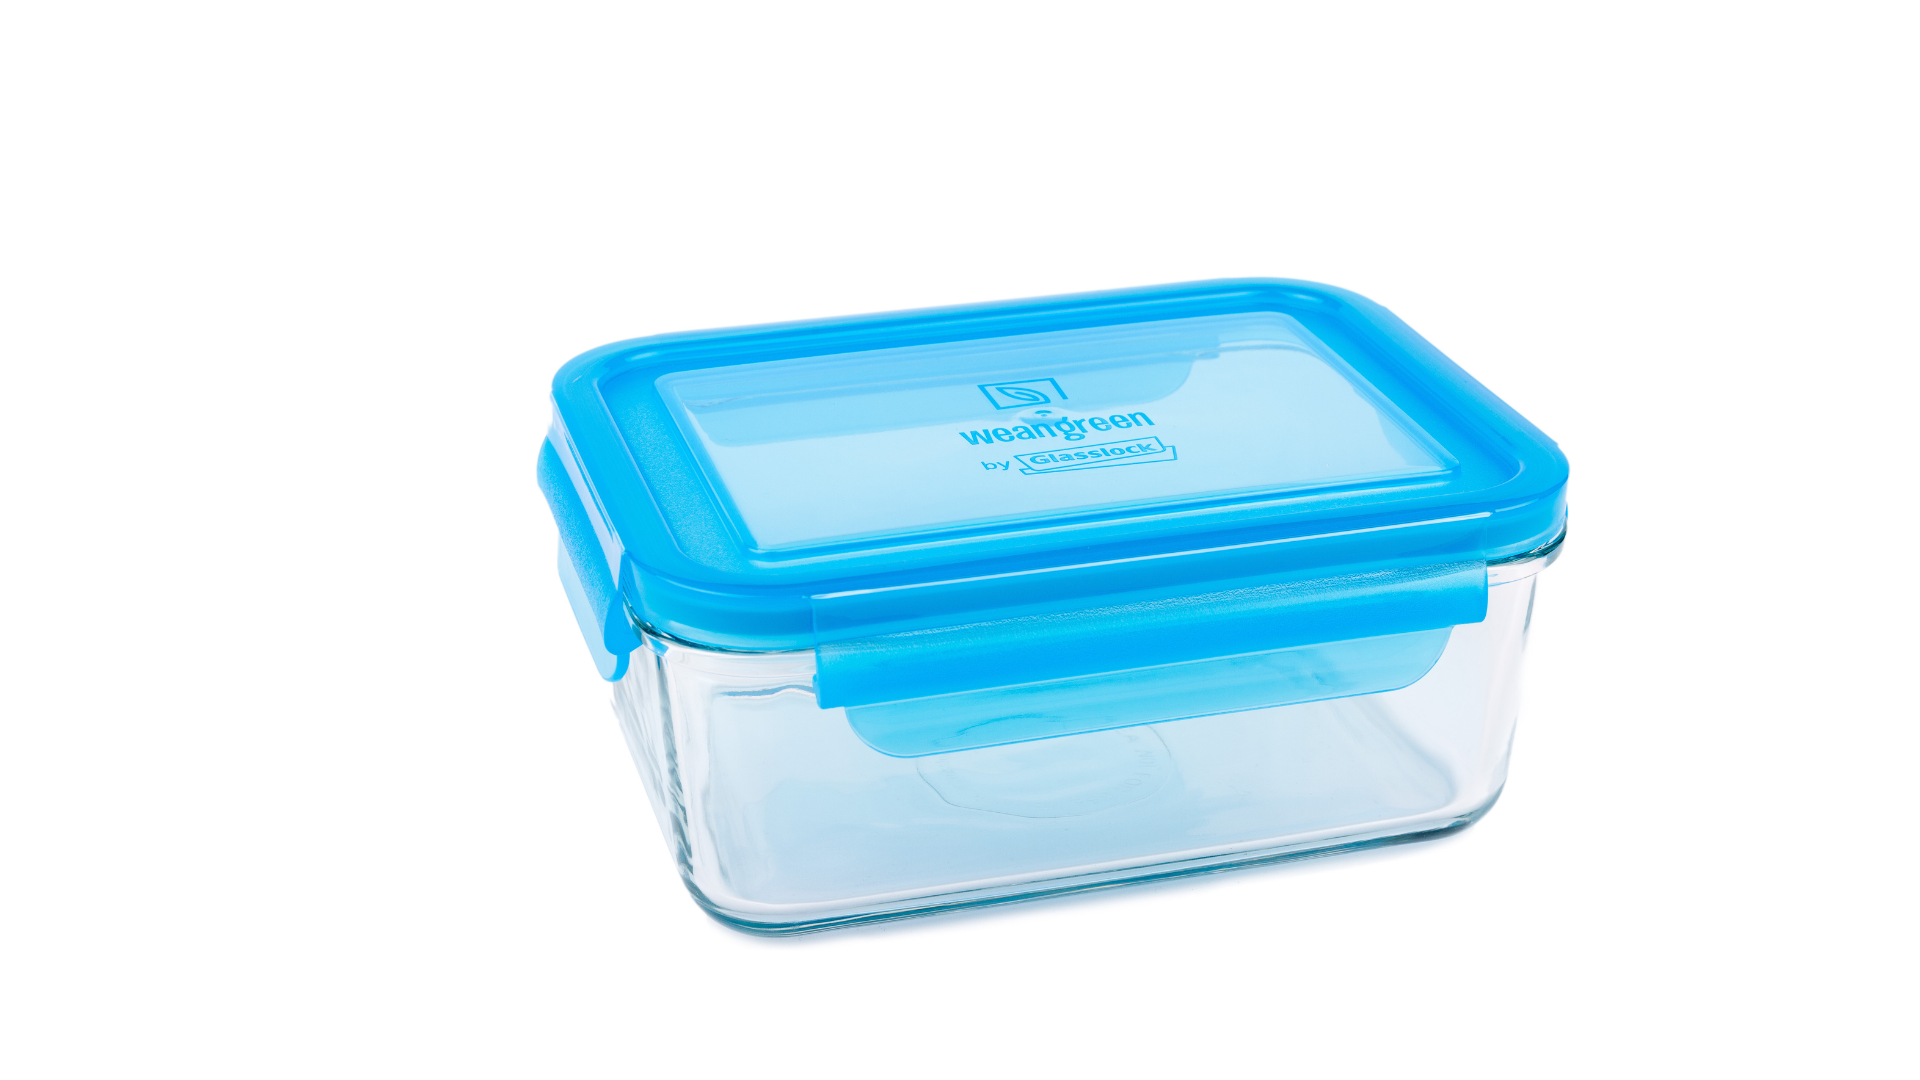 Acorn Baby Food Container with Thin Lid, 2PK Blue and Green Meal Prep  Container